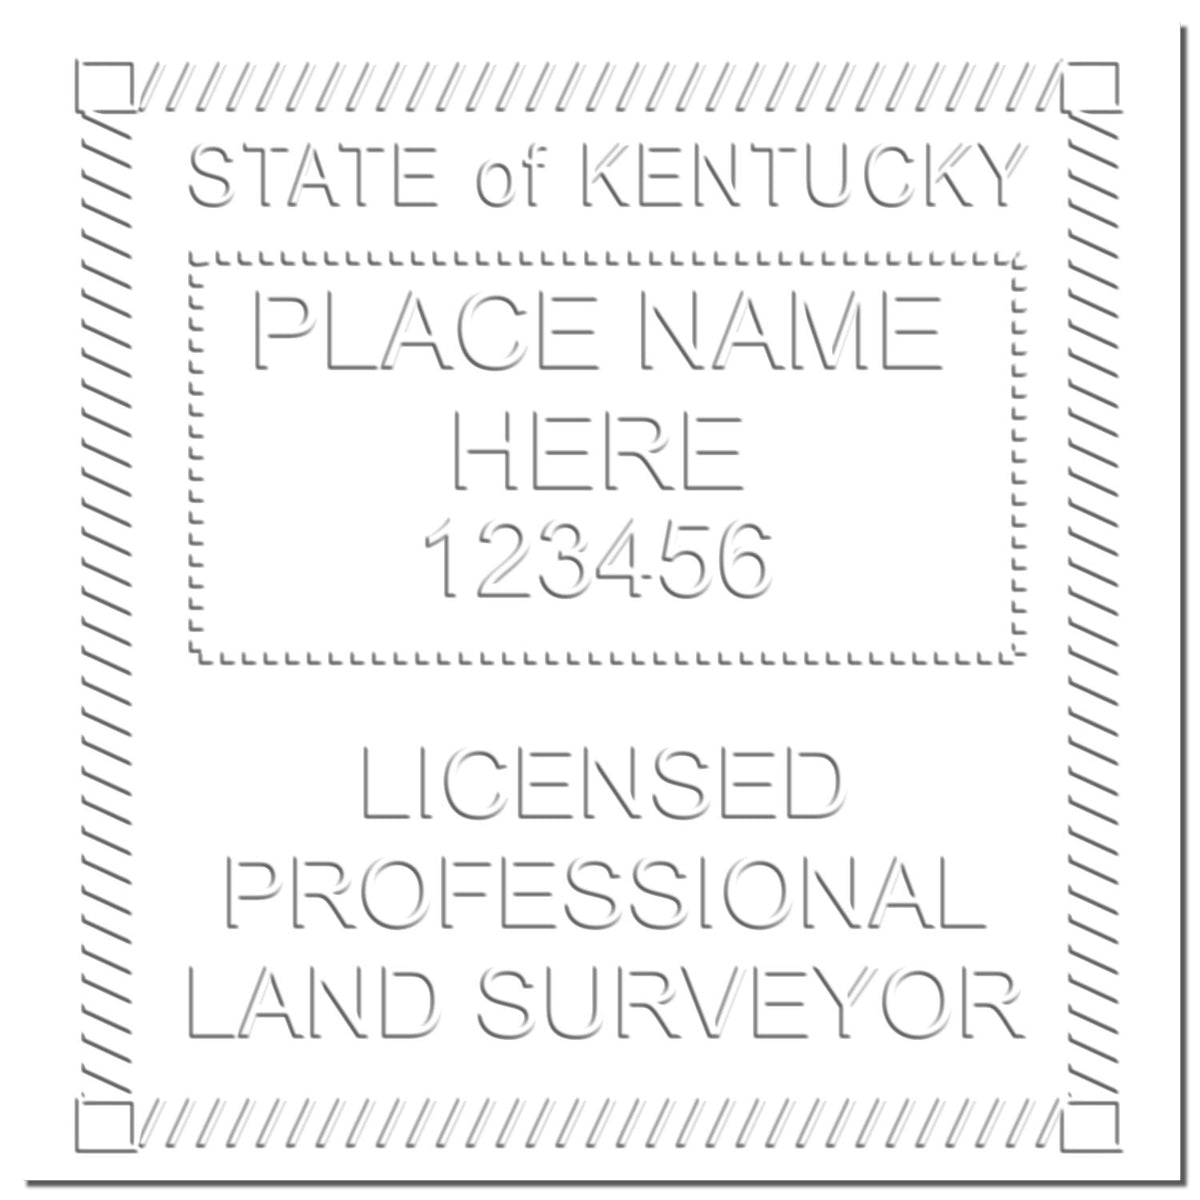 This paper is stamped with a sample imprint of the Hybrid Kentucky Land Surveyor Seal, signifying its quality and reliability.